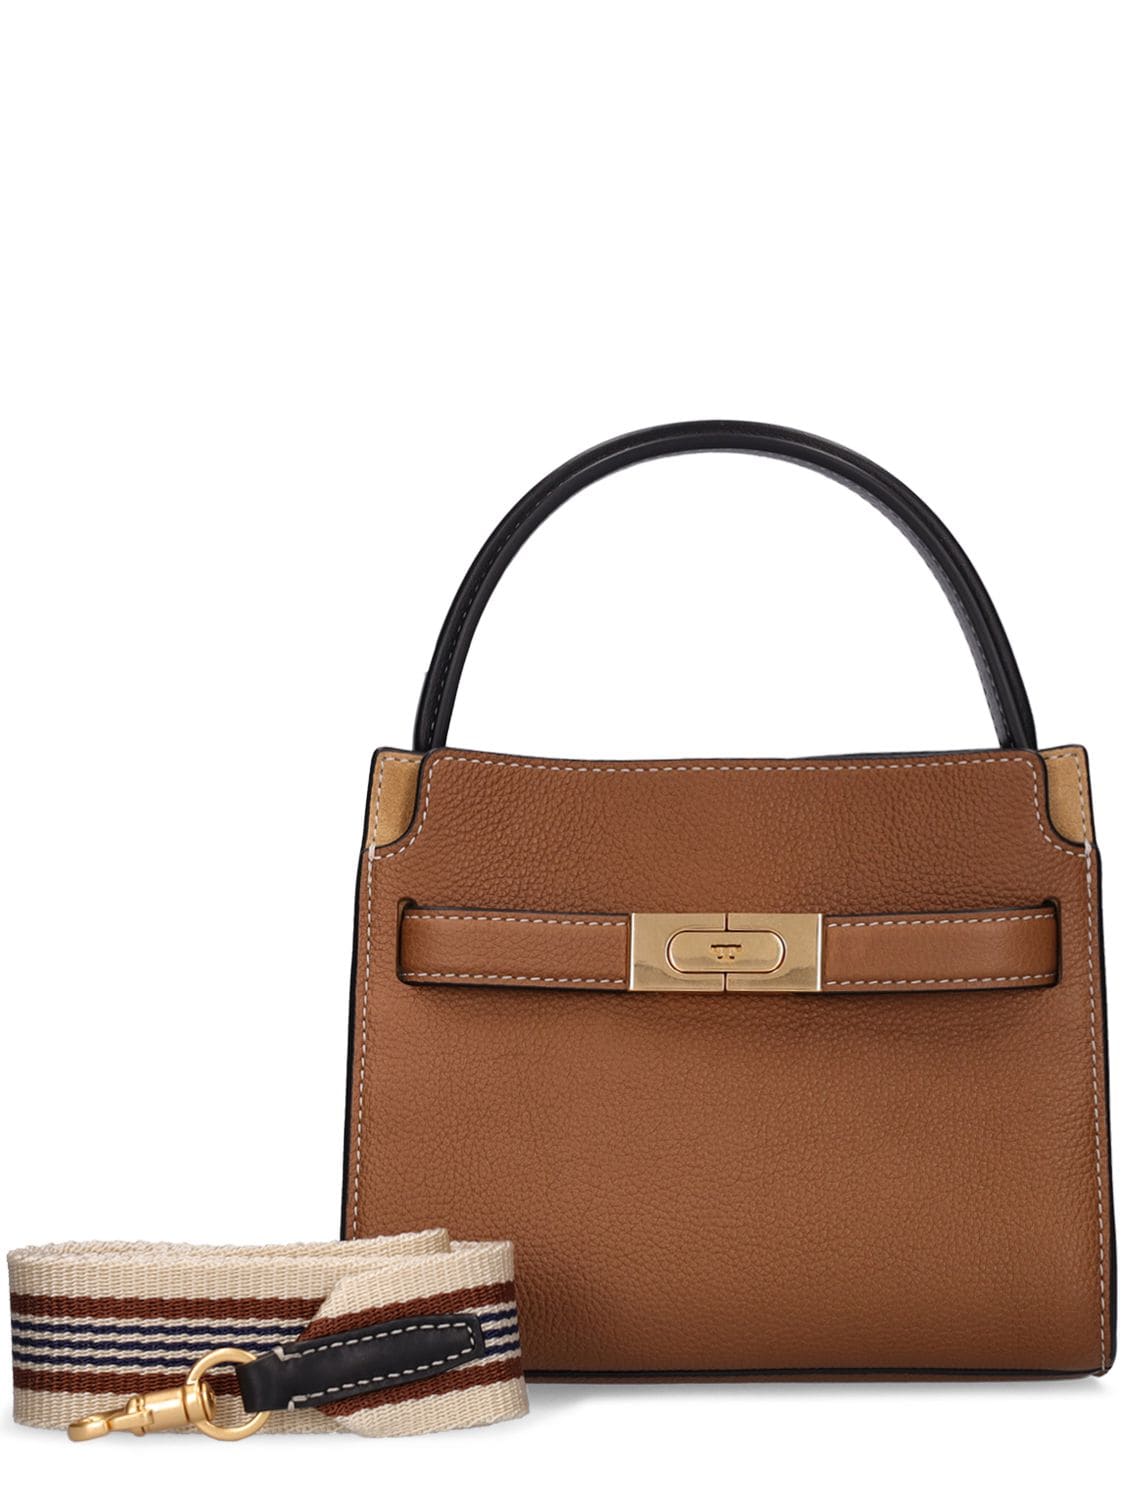 Shop Tory Burch Petite Double Lee Radziwill Pebbled Bag In Tigers Eye